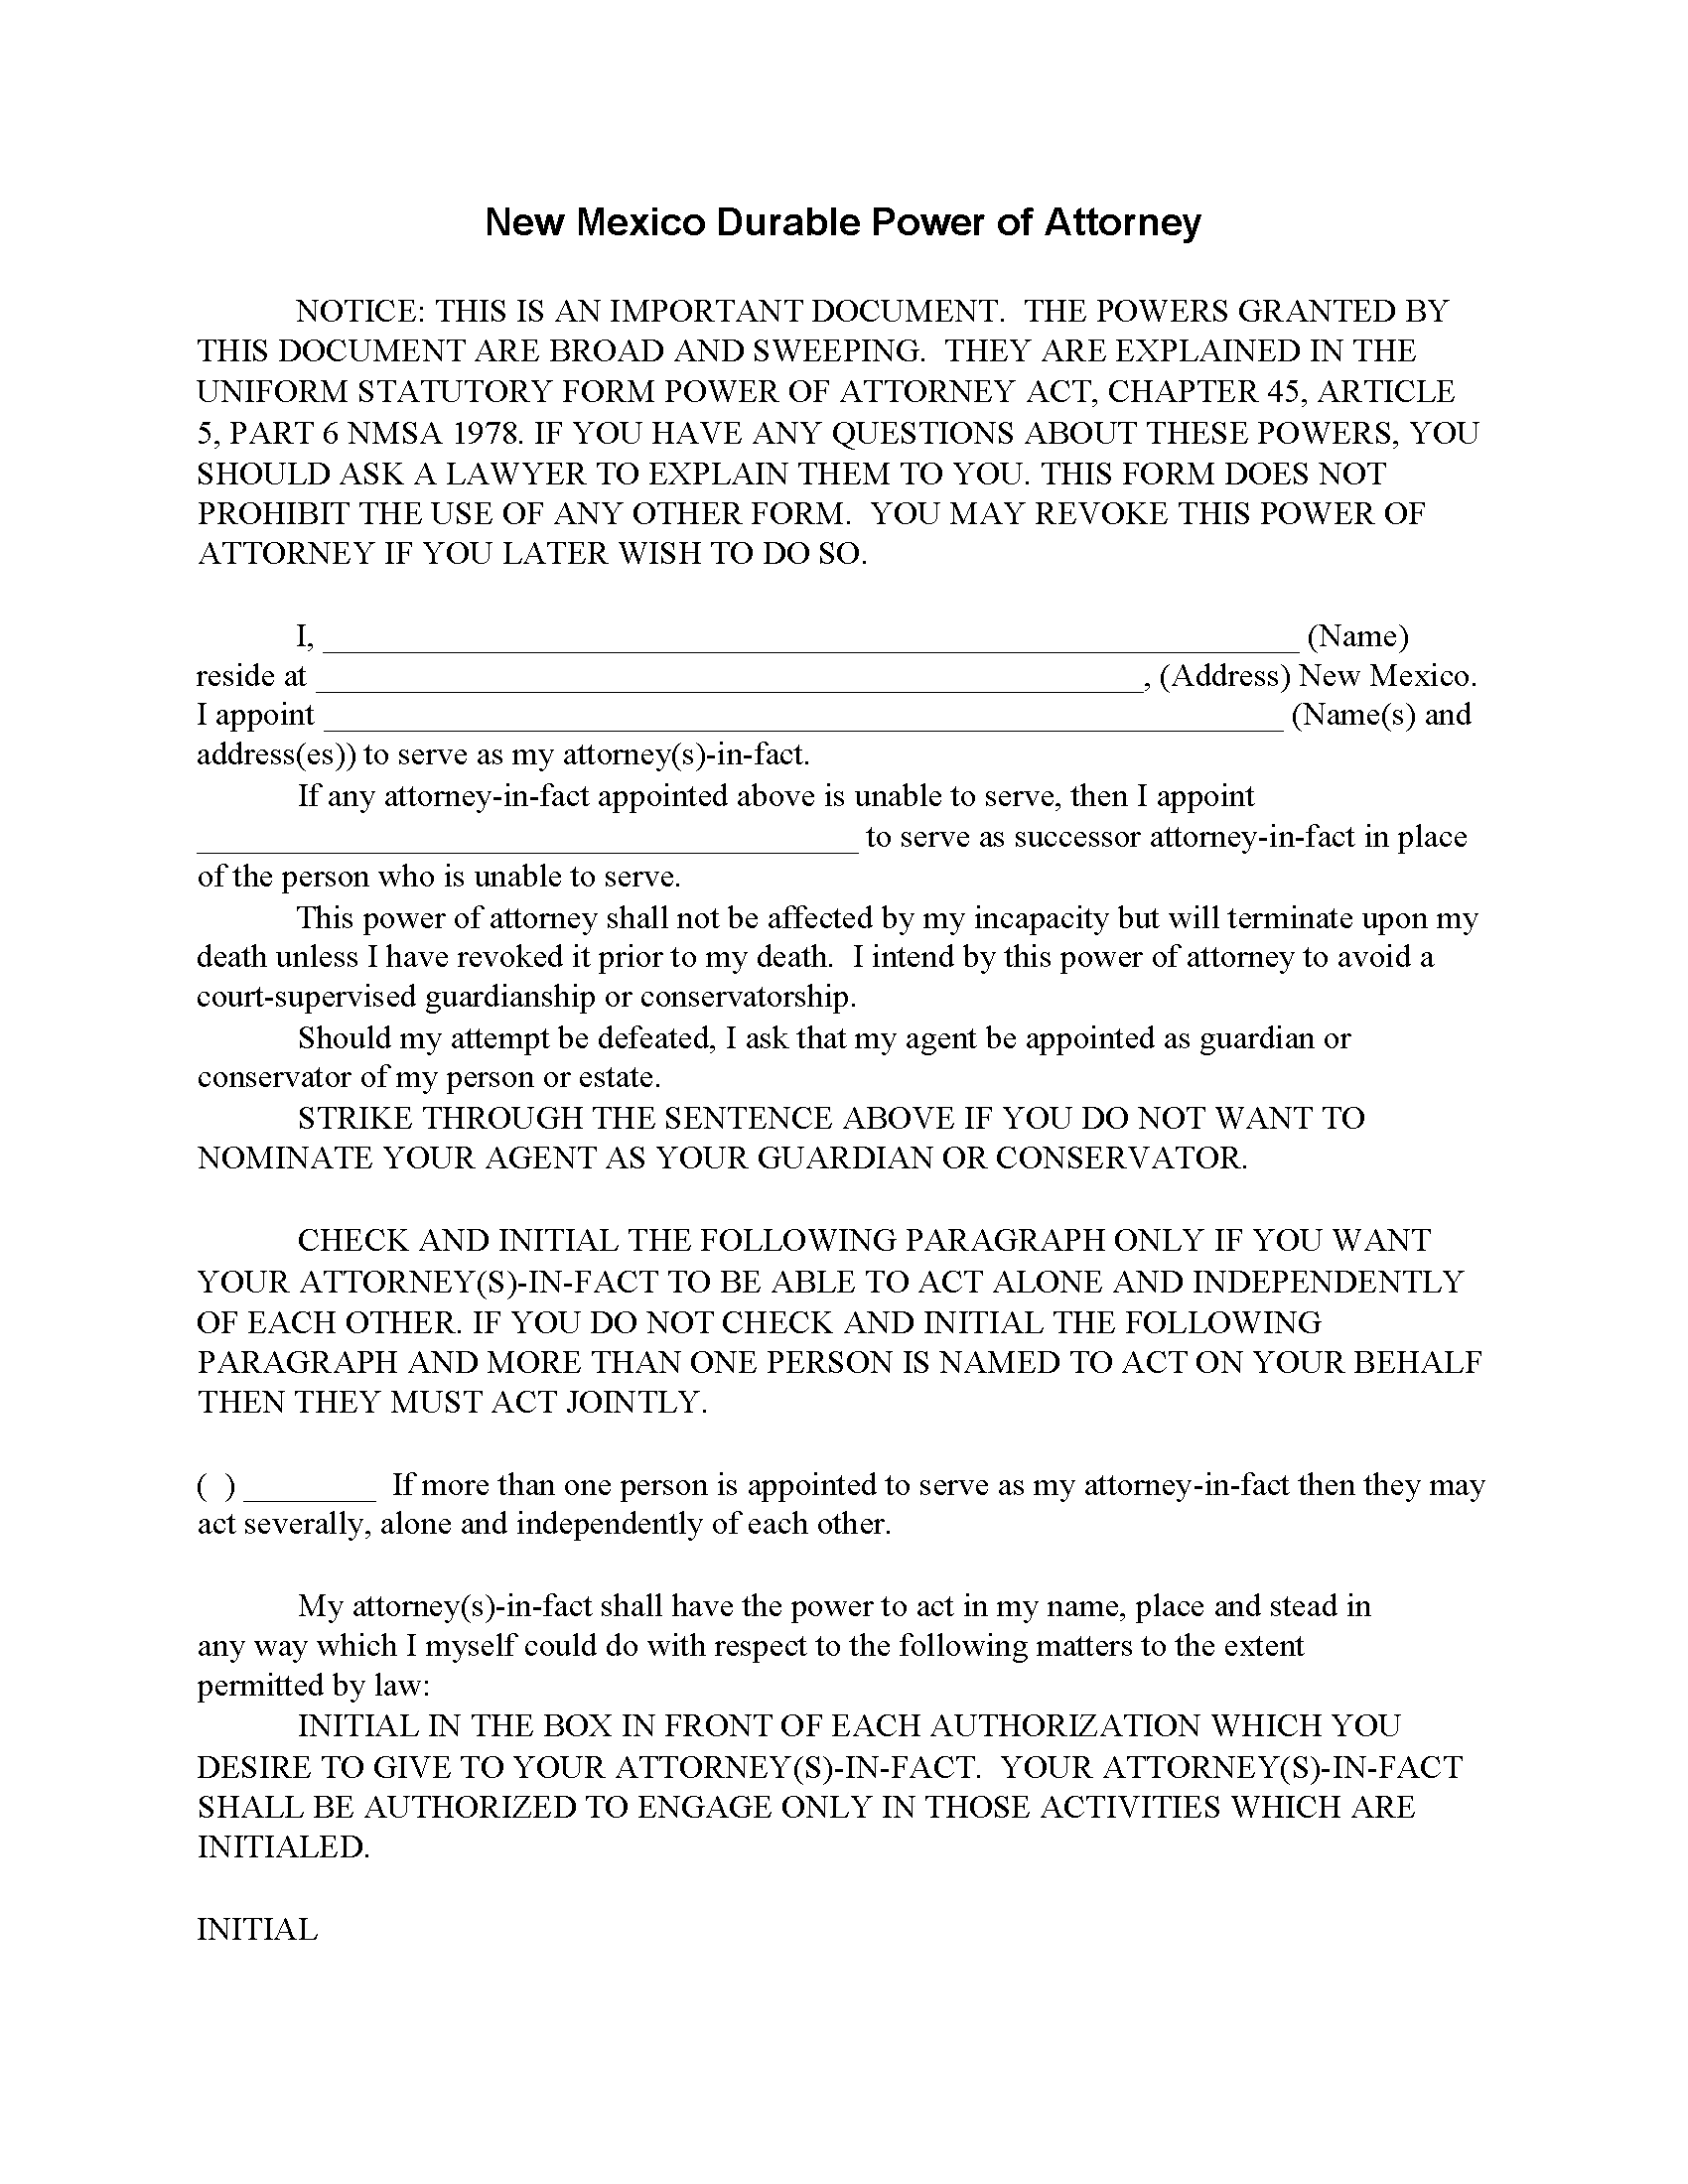 new-mexico-durable-power-of-attorney-form-fillable-pdf-free